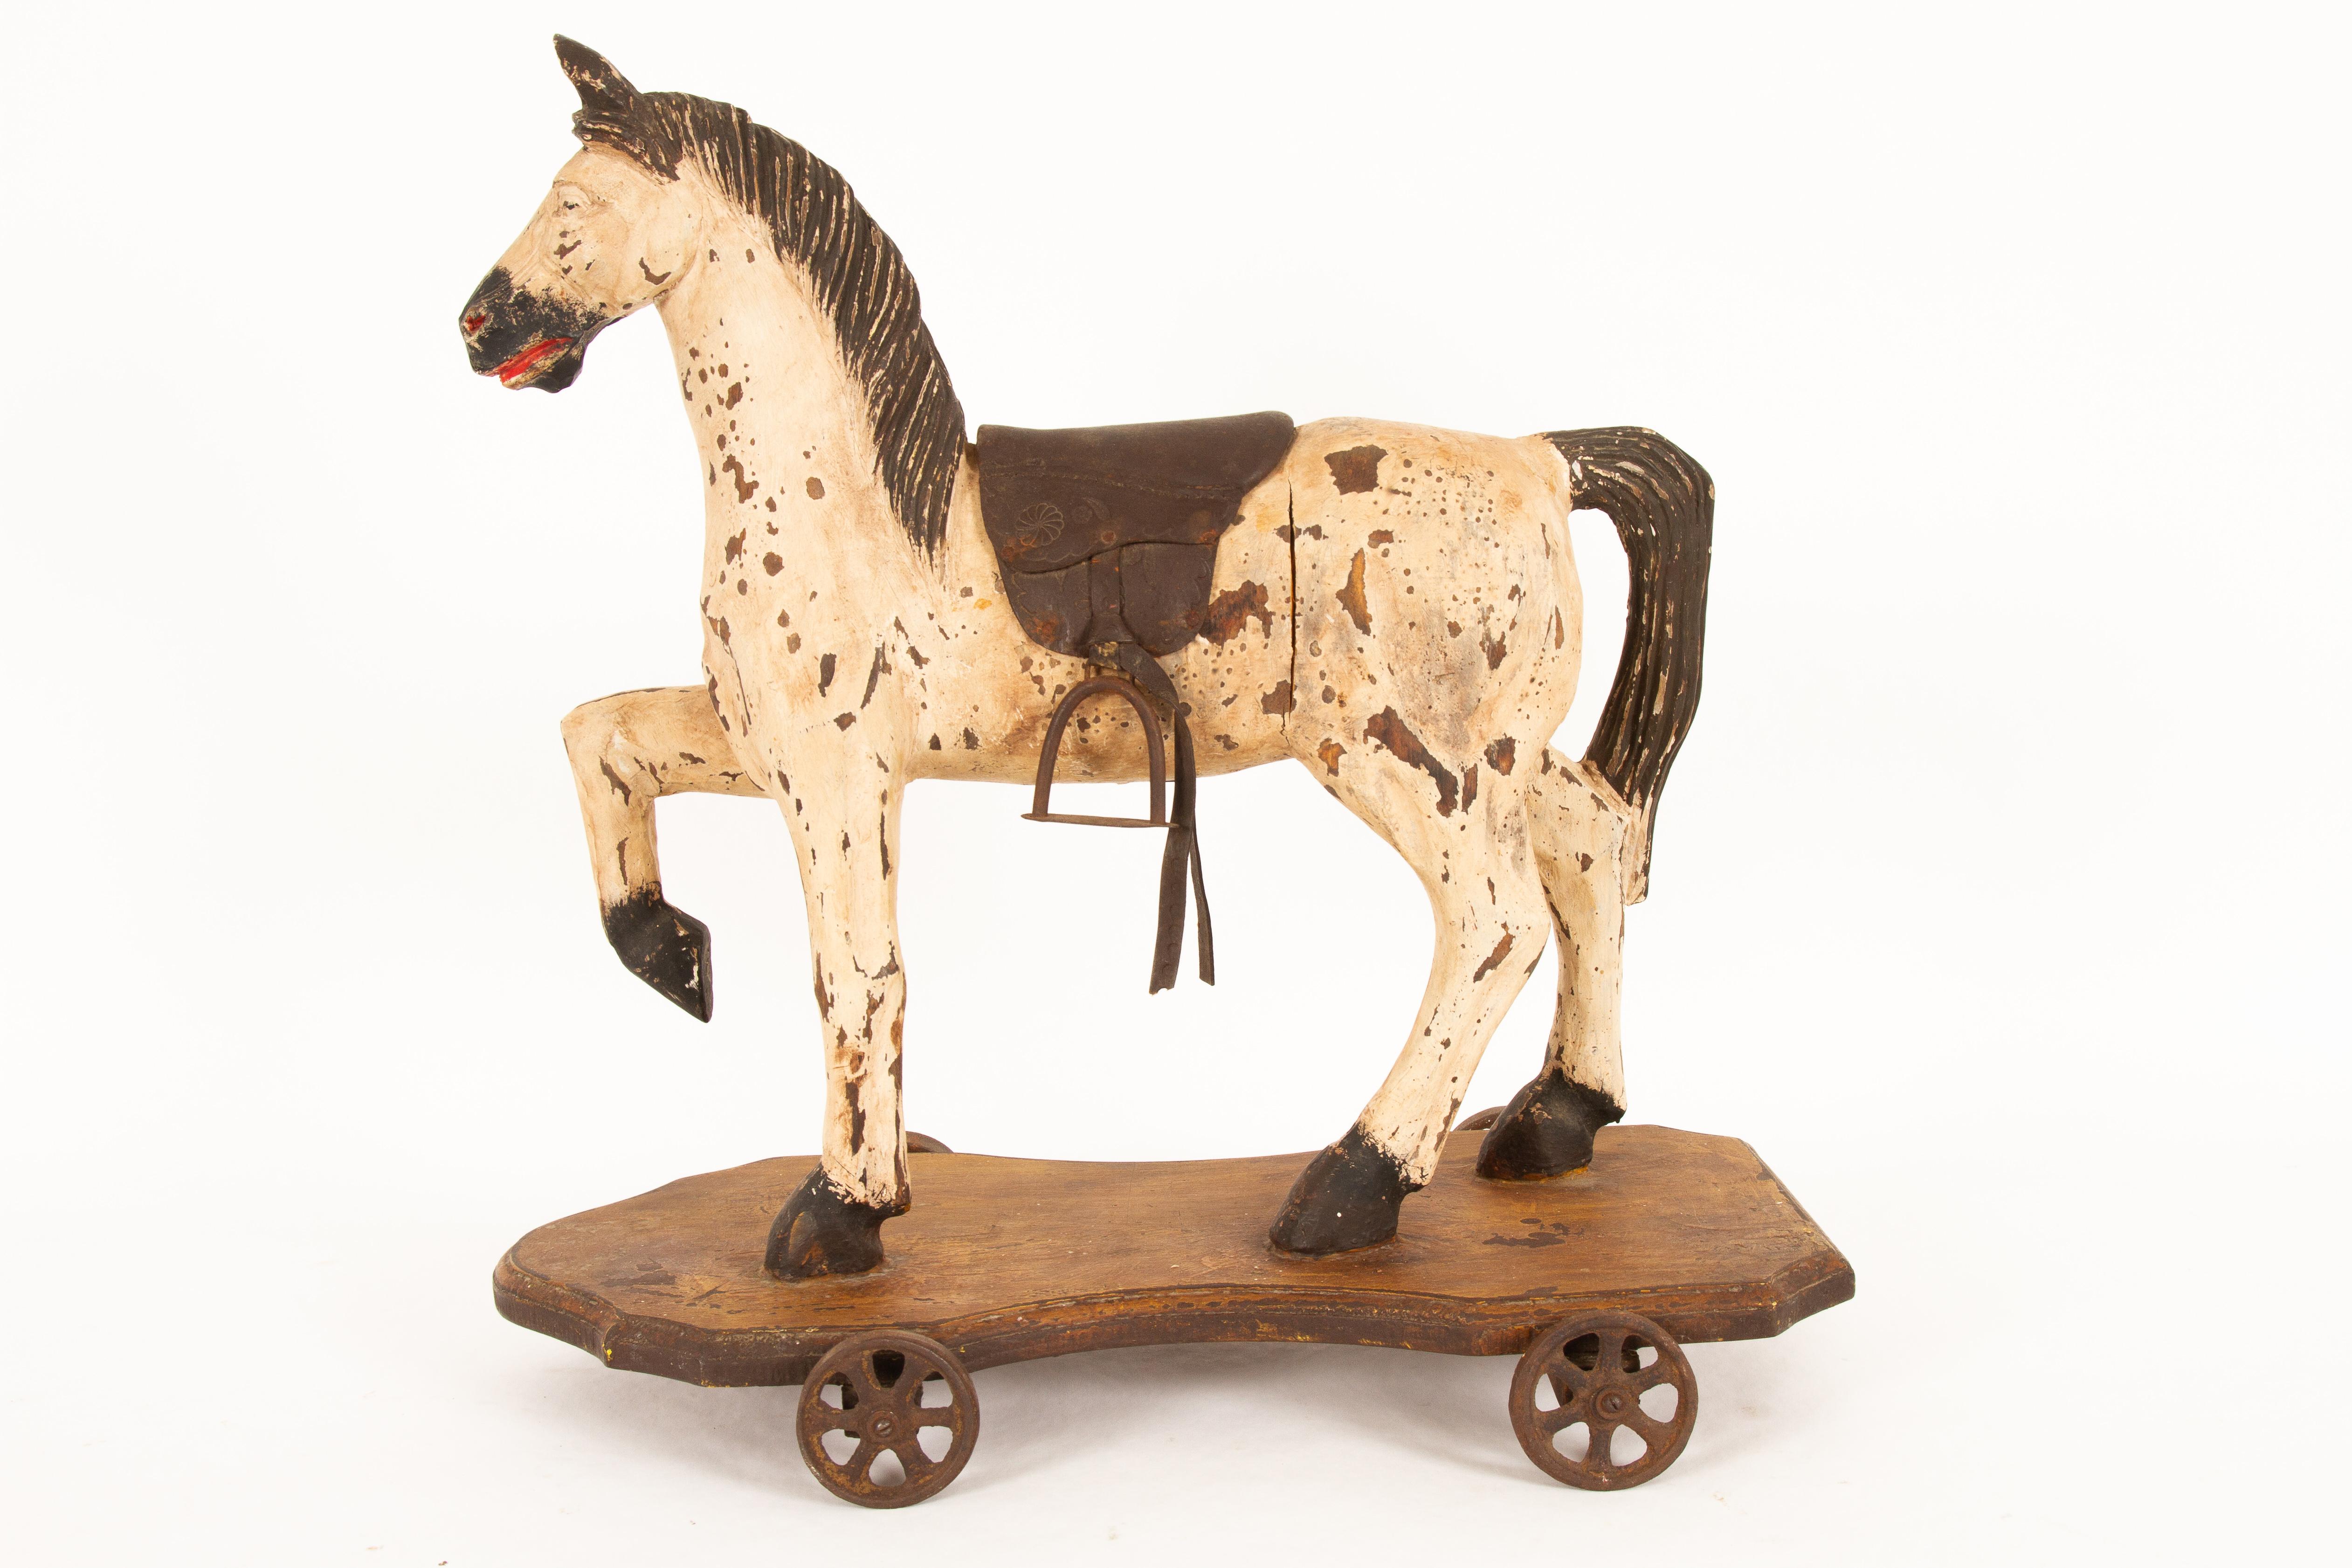 Beautiful and decorative toy horse. All original paint, saddle and wheels. Carved of solid wood and hand painted. Complete with saddle and stirrups. Rare condition. Scandinavian origin.